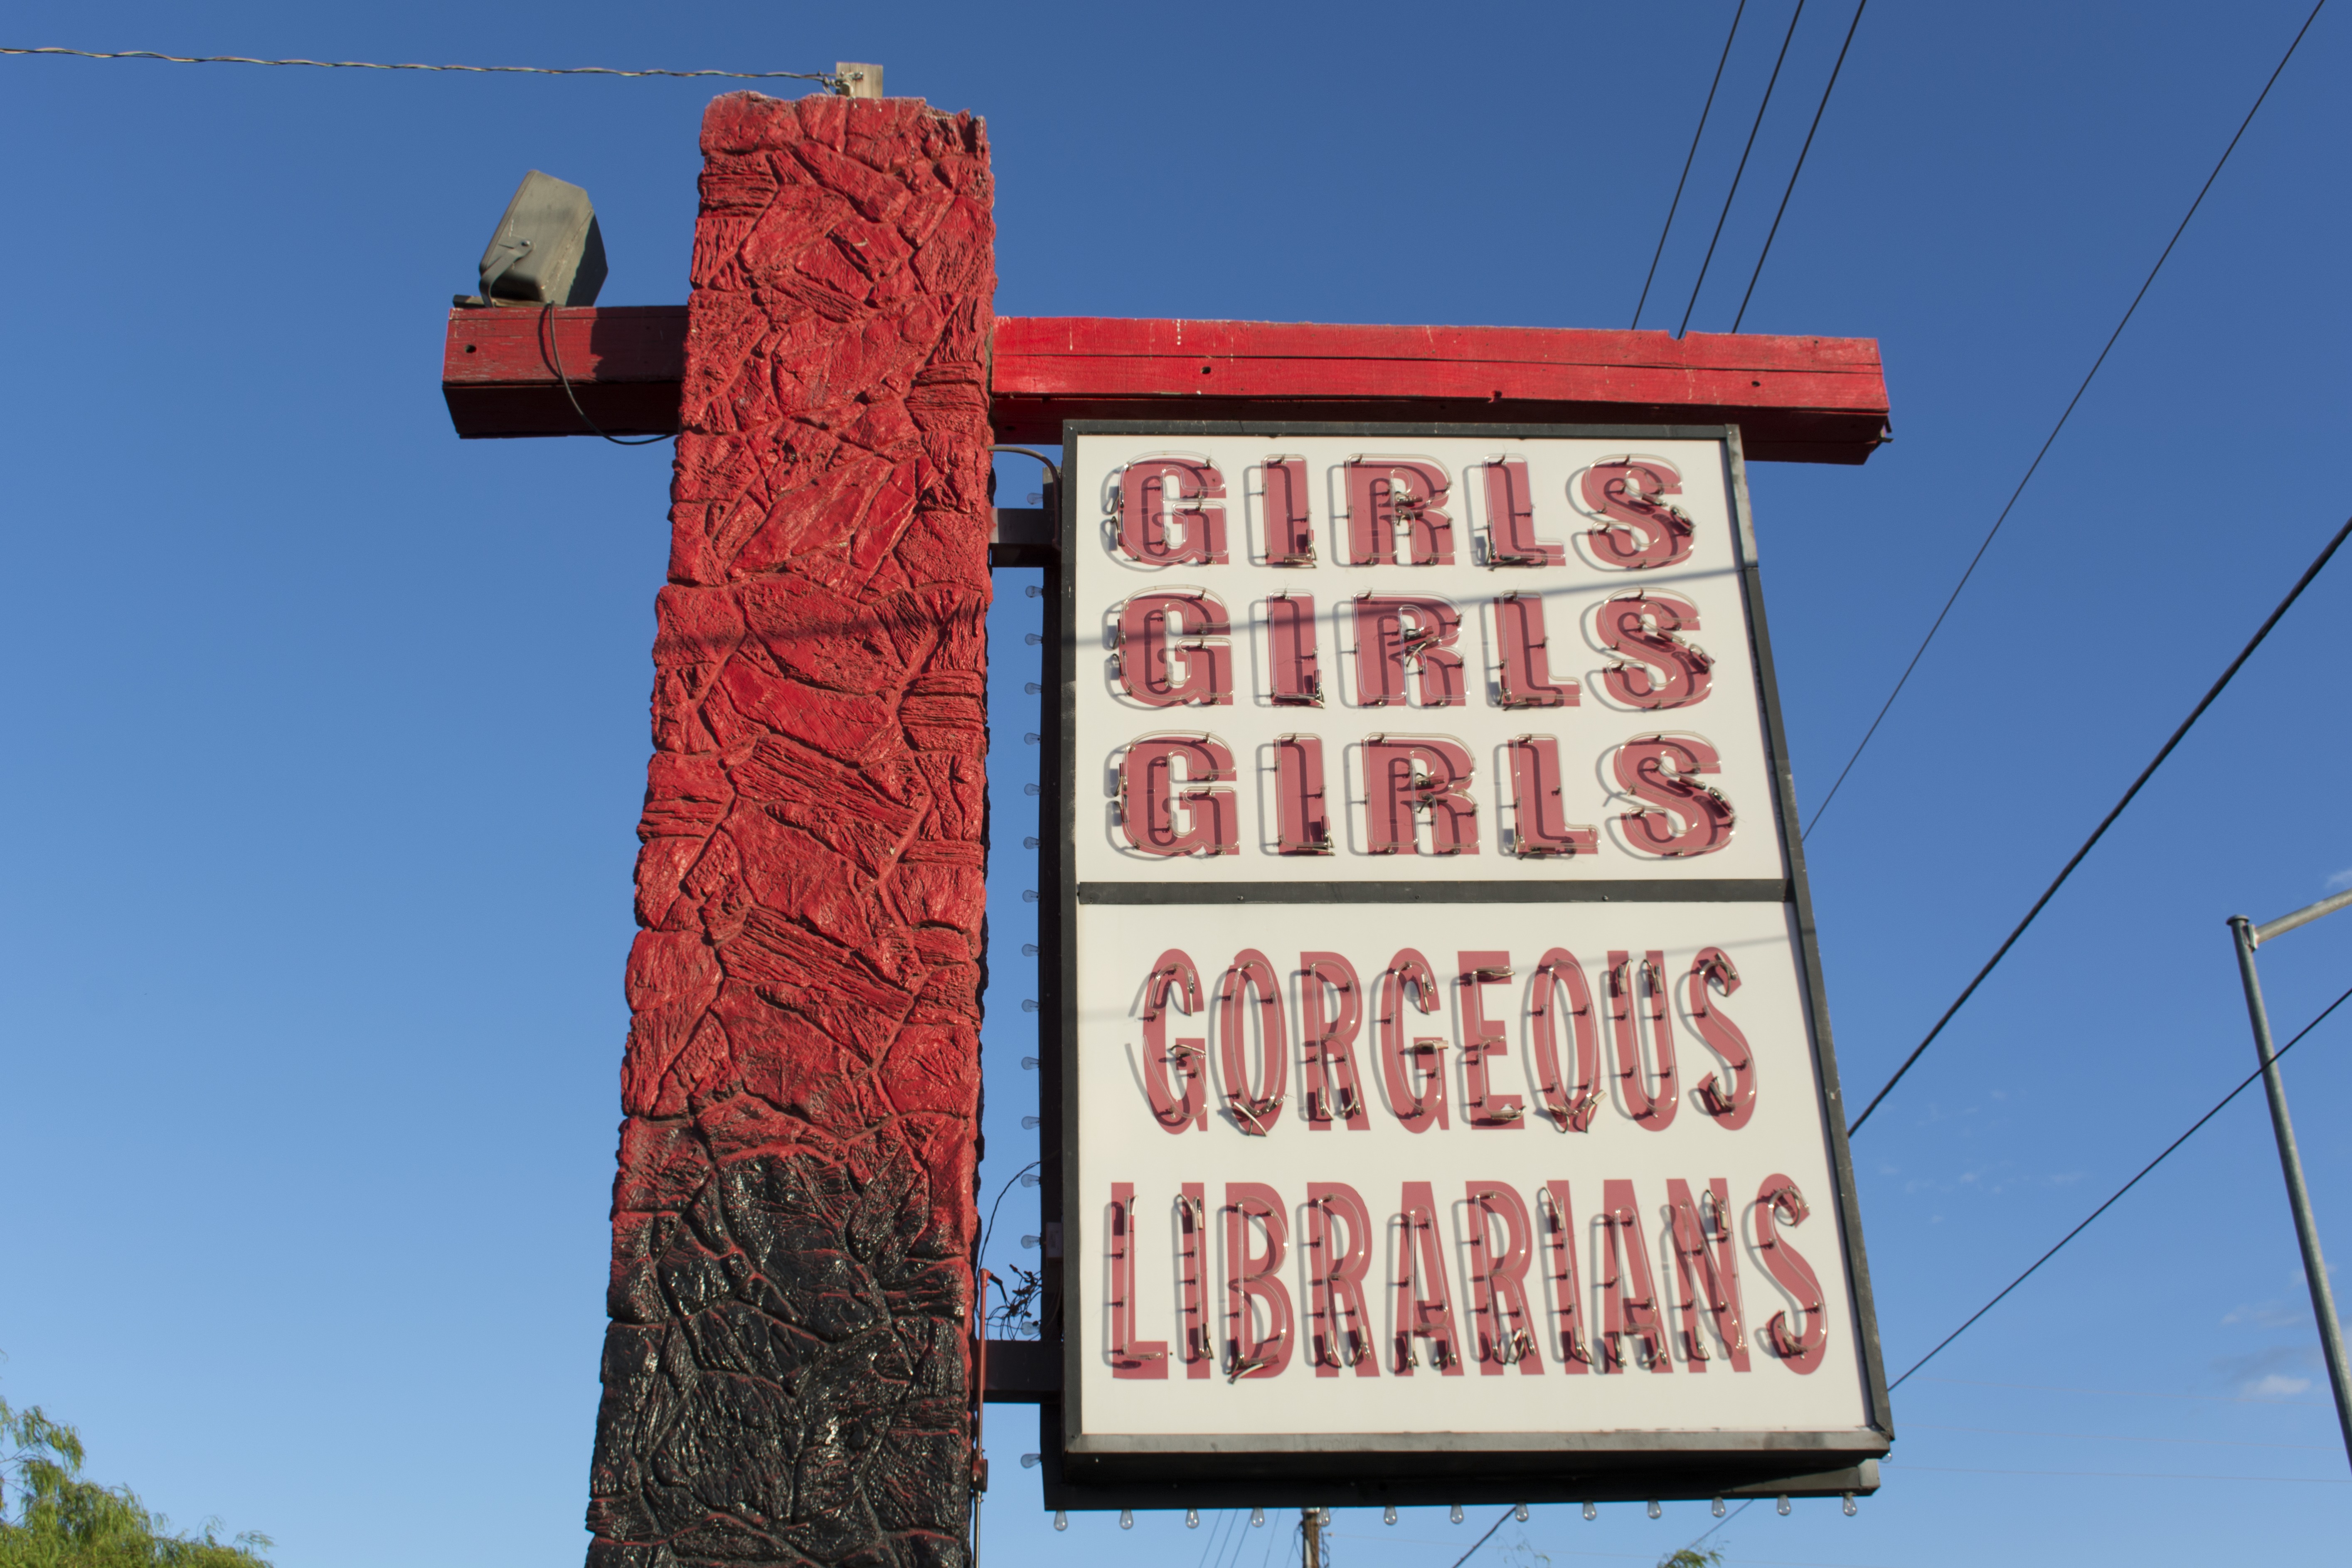 Photographs of The Library Gentlemen's Club, Las Vegas (Nev.), March 27, 2017